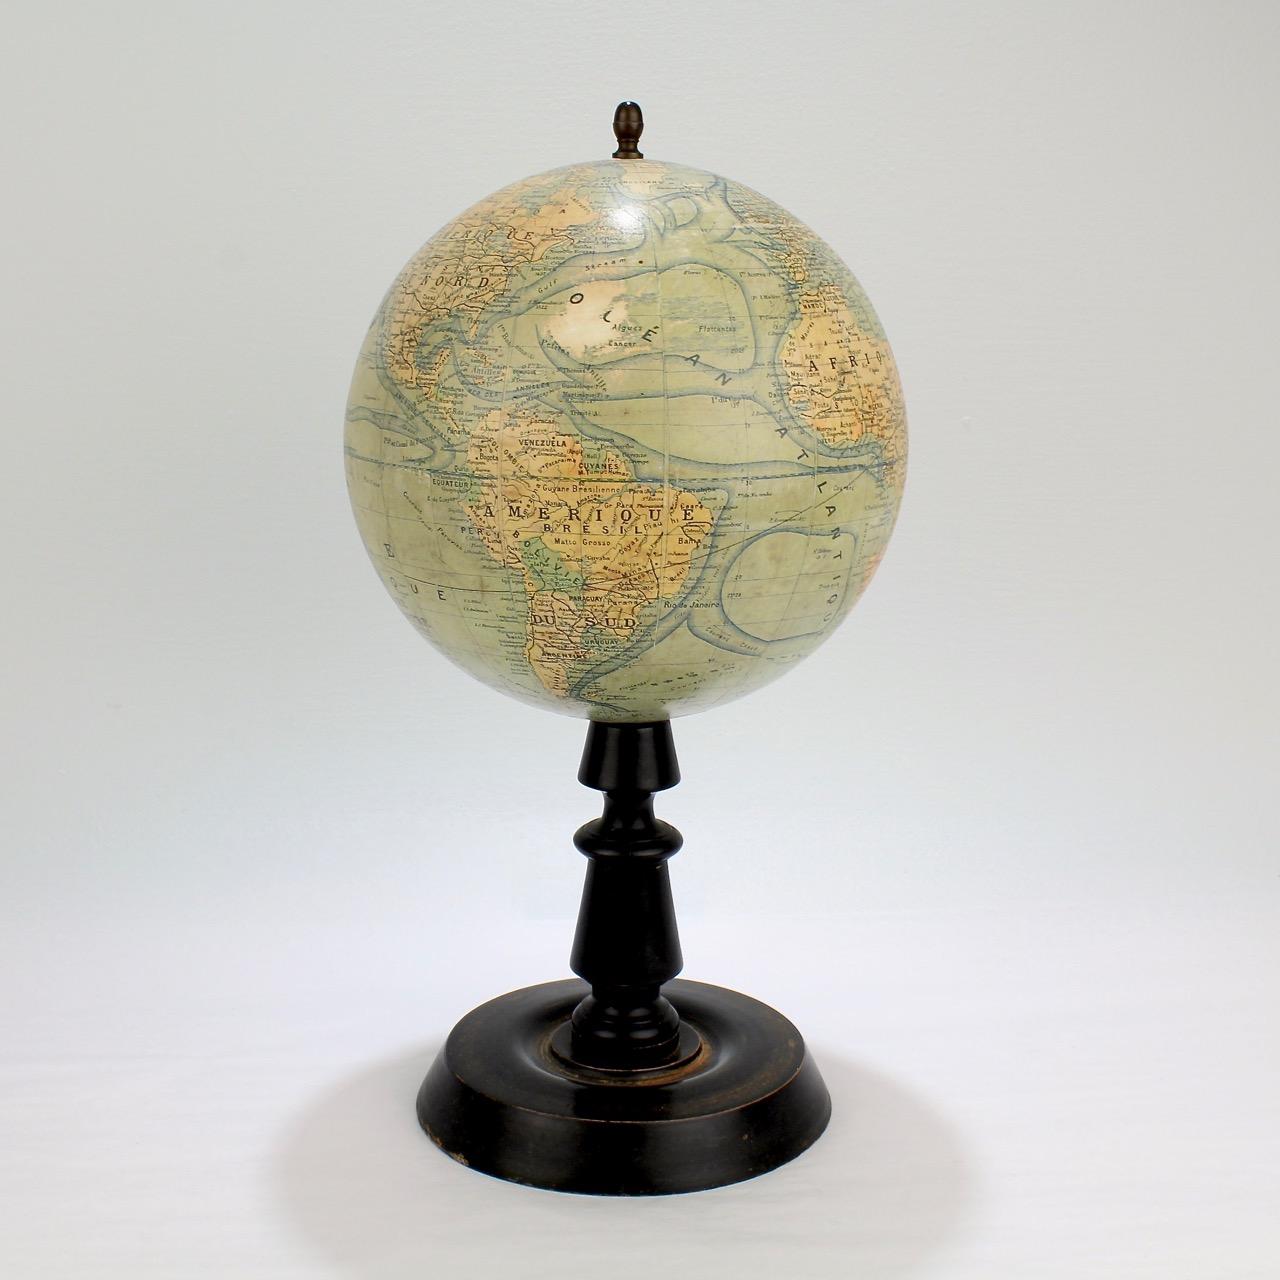 A wonderful terrestrial globe on an ebonized, turned wooden stand with a brass finial.

With 12 gores and 2 polar caps that depict the world's continents, oceans, and major currents. 

Marked for J. Forest Editor and for Paris.

Measures: Height ca.